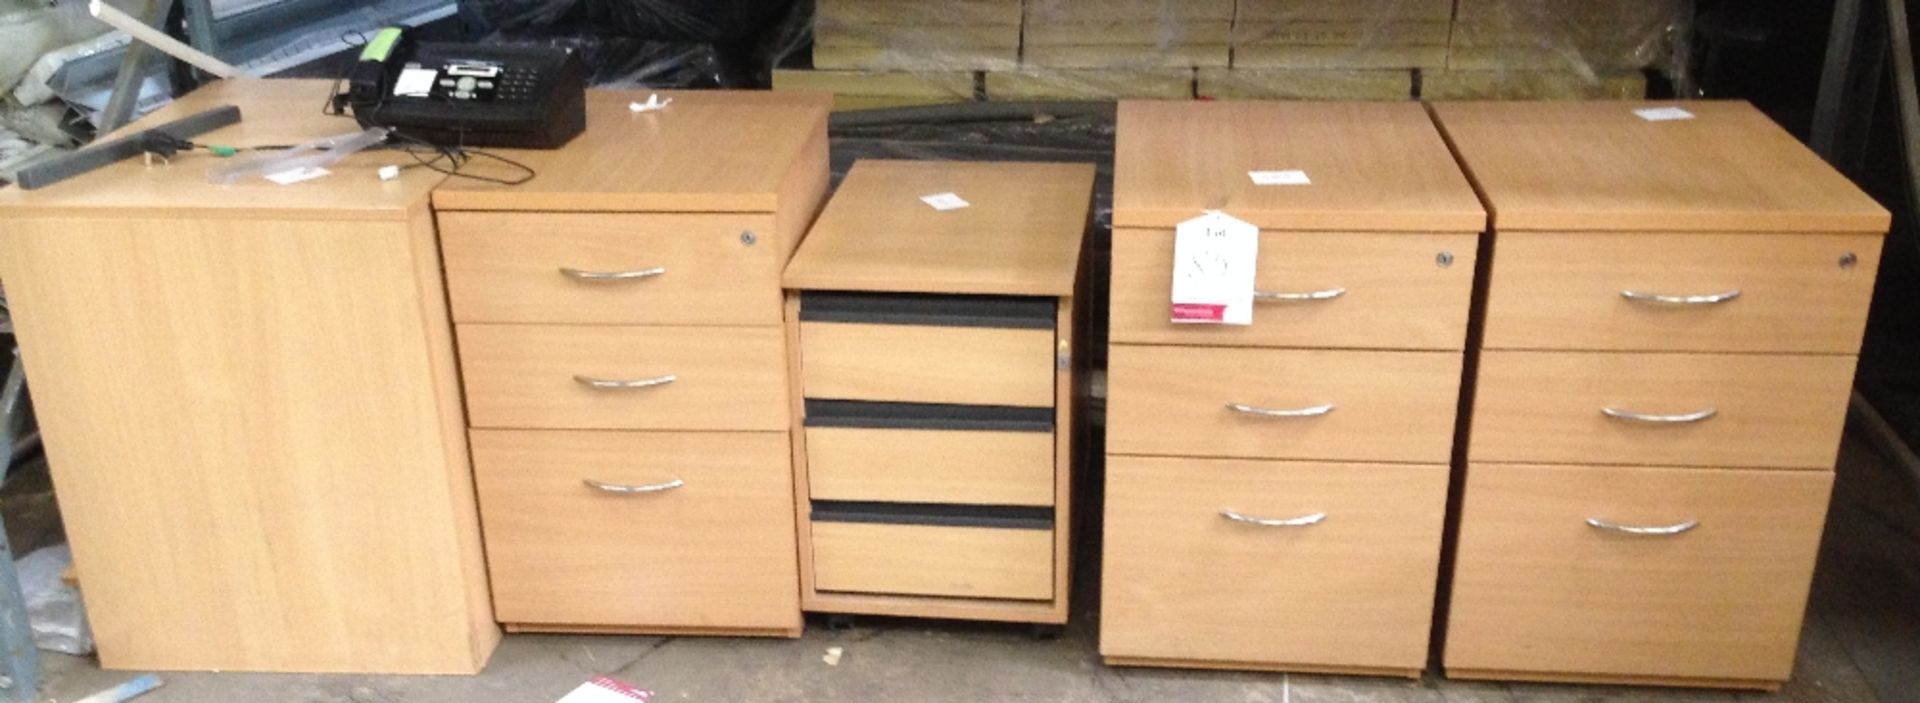 4 x Office pedestal drawer units and shelf some require attention plus fax machine